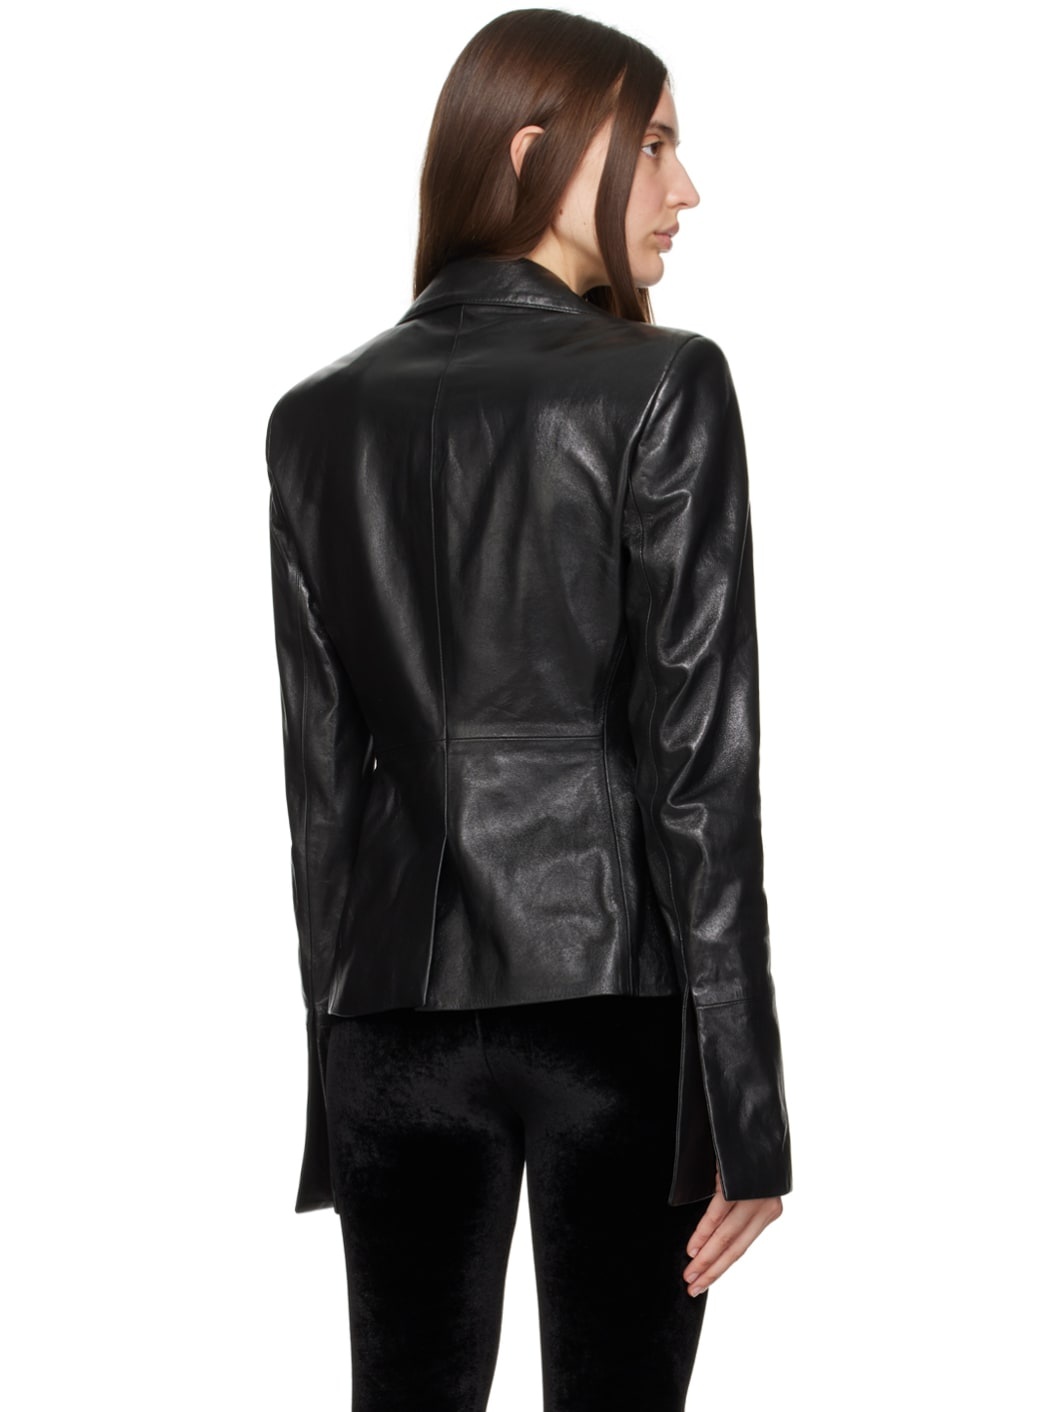 Black Double-Breasted Leather Jacket - 3